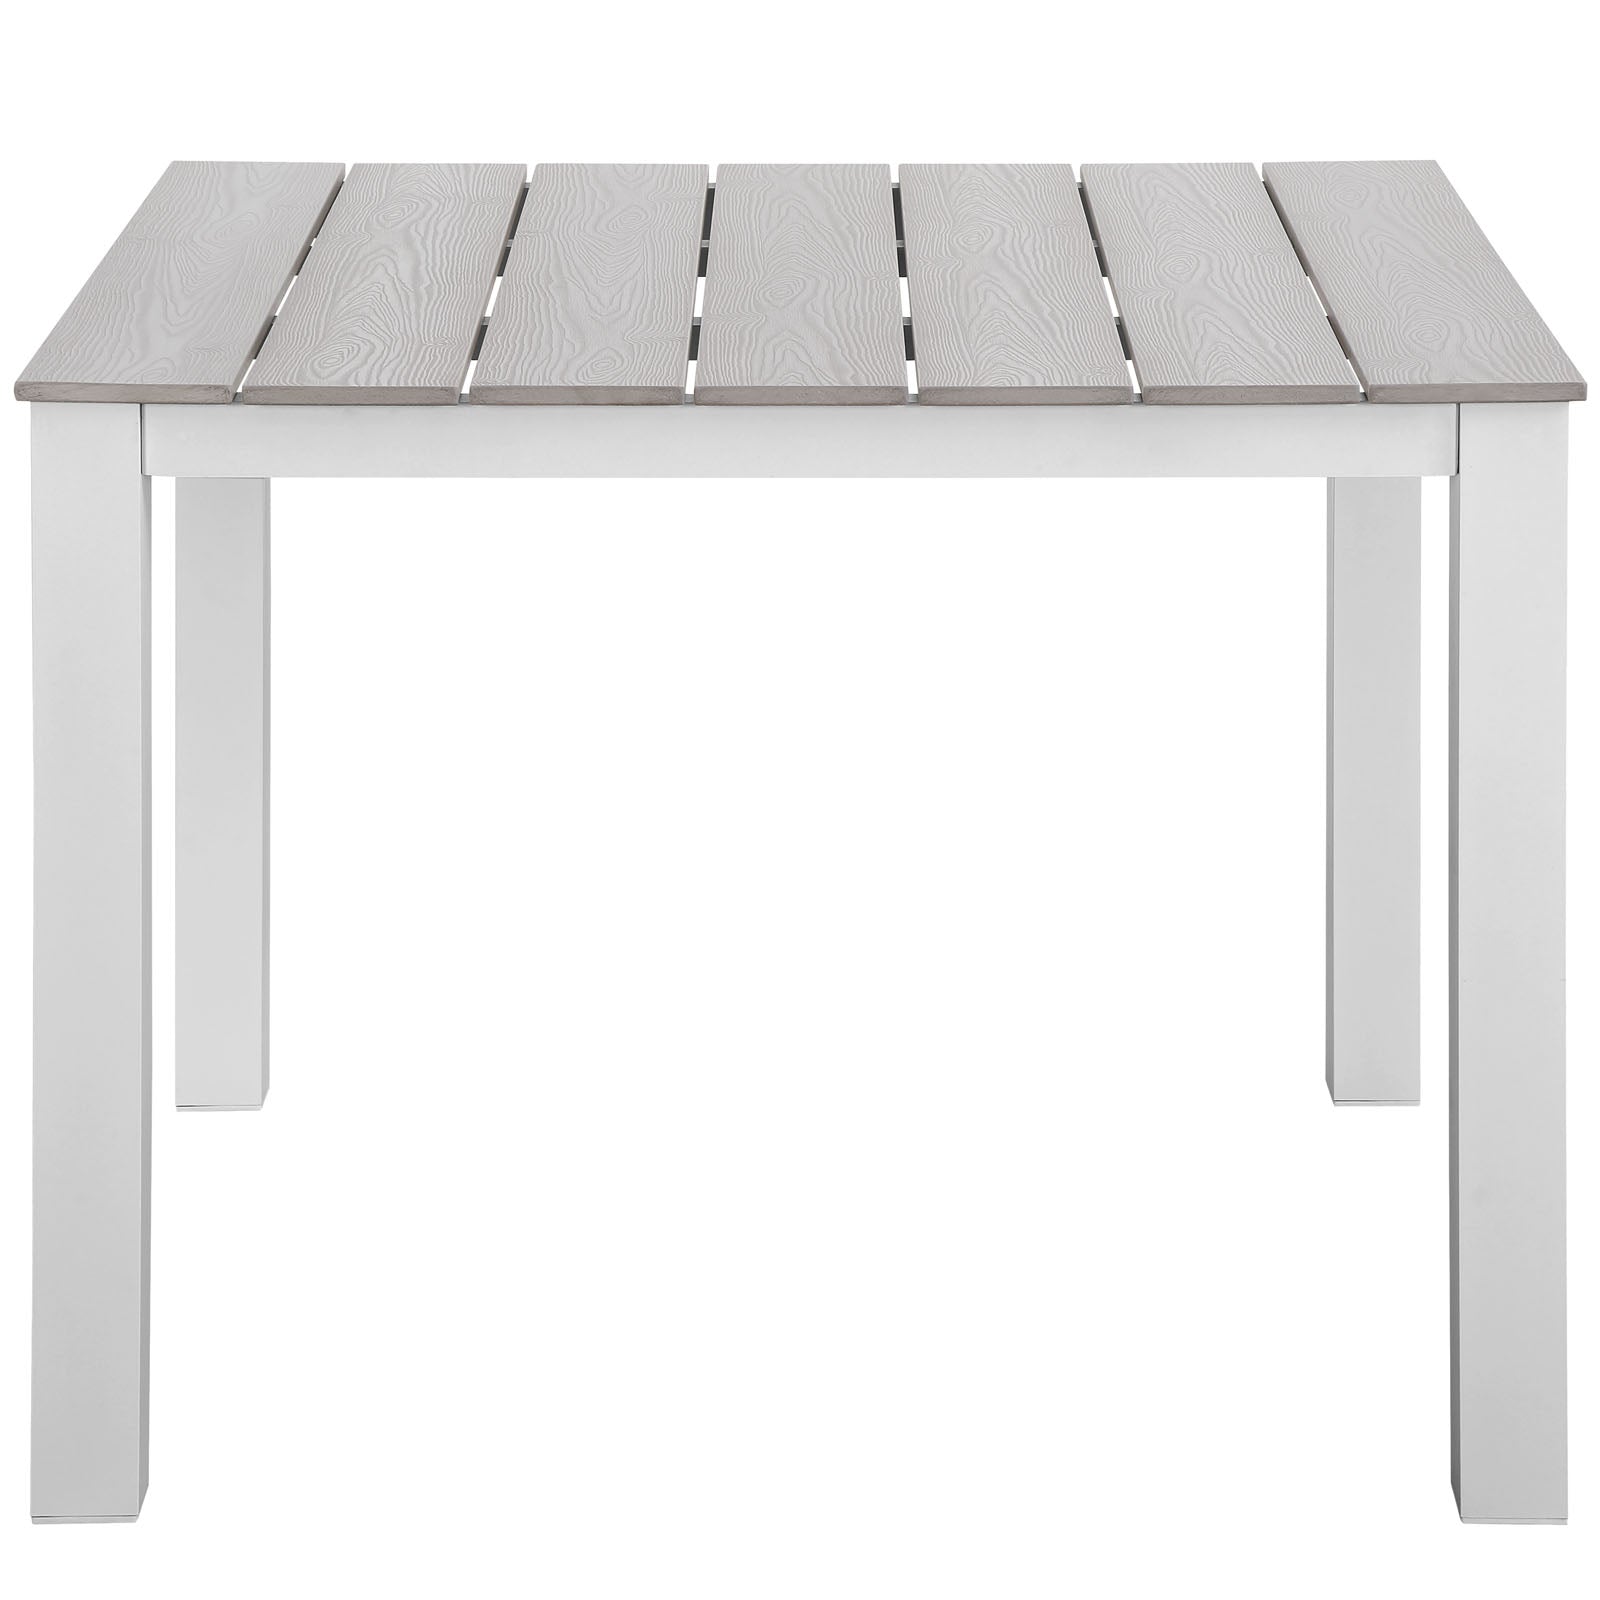 Maine 40" Outdoor Patio Dining Table - East Shore Modern Home Furnishings